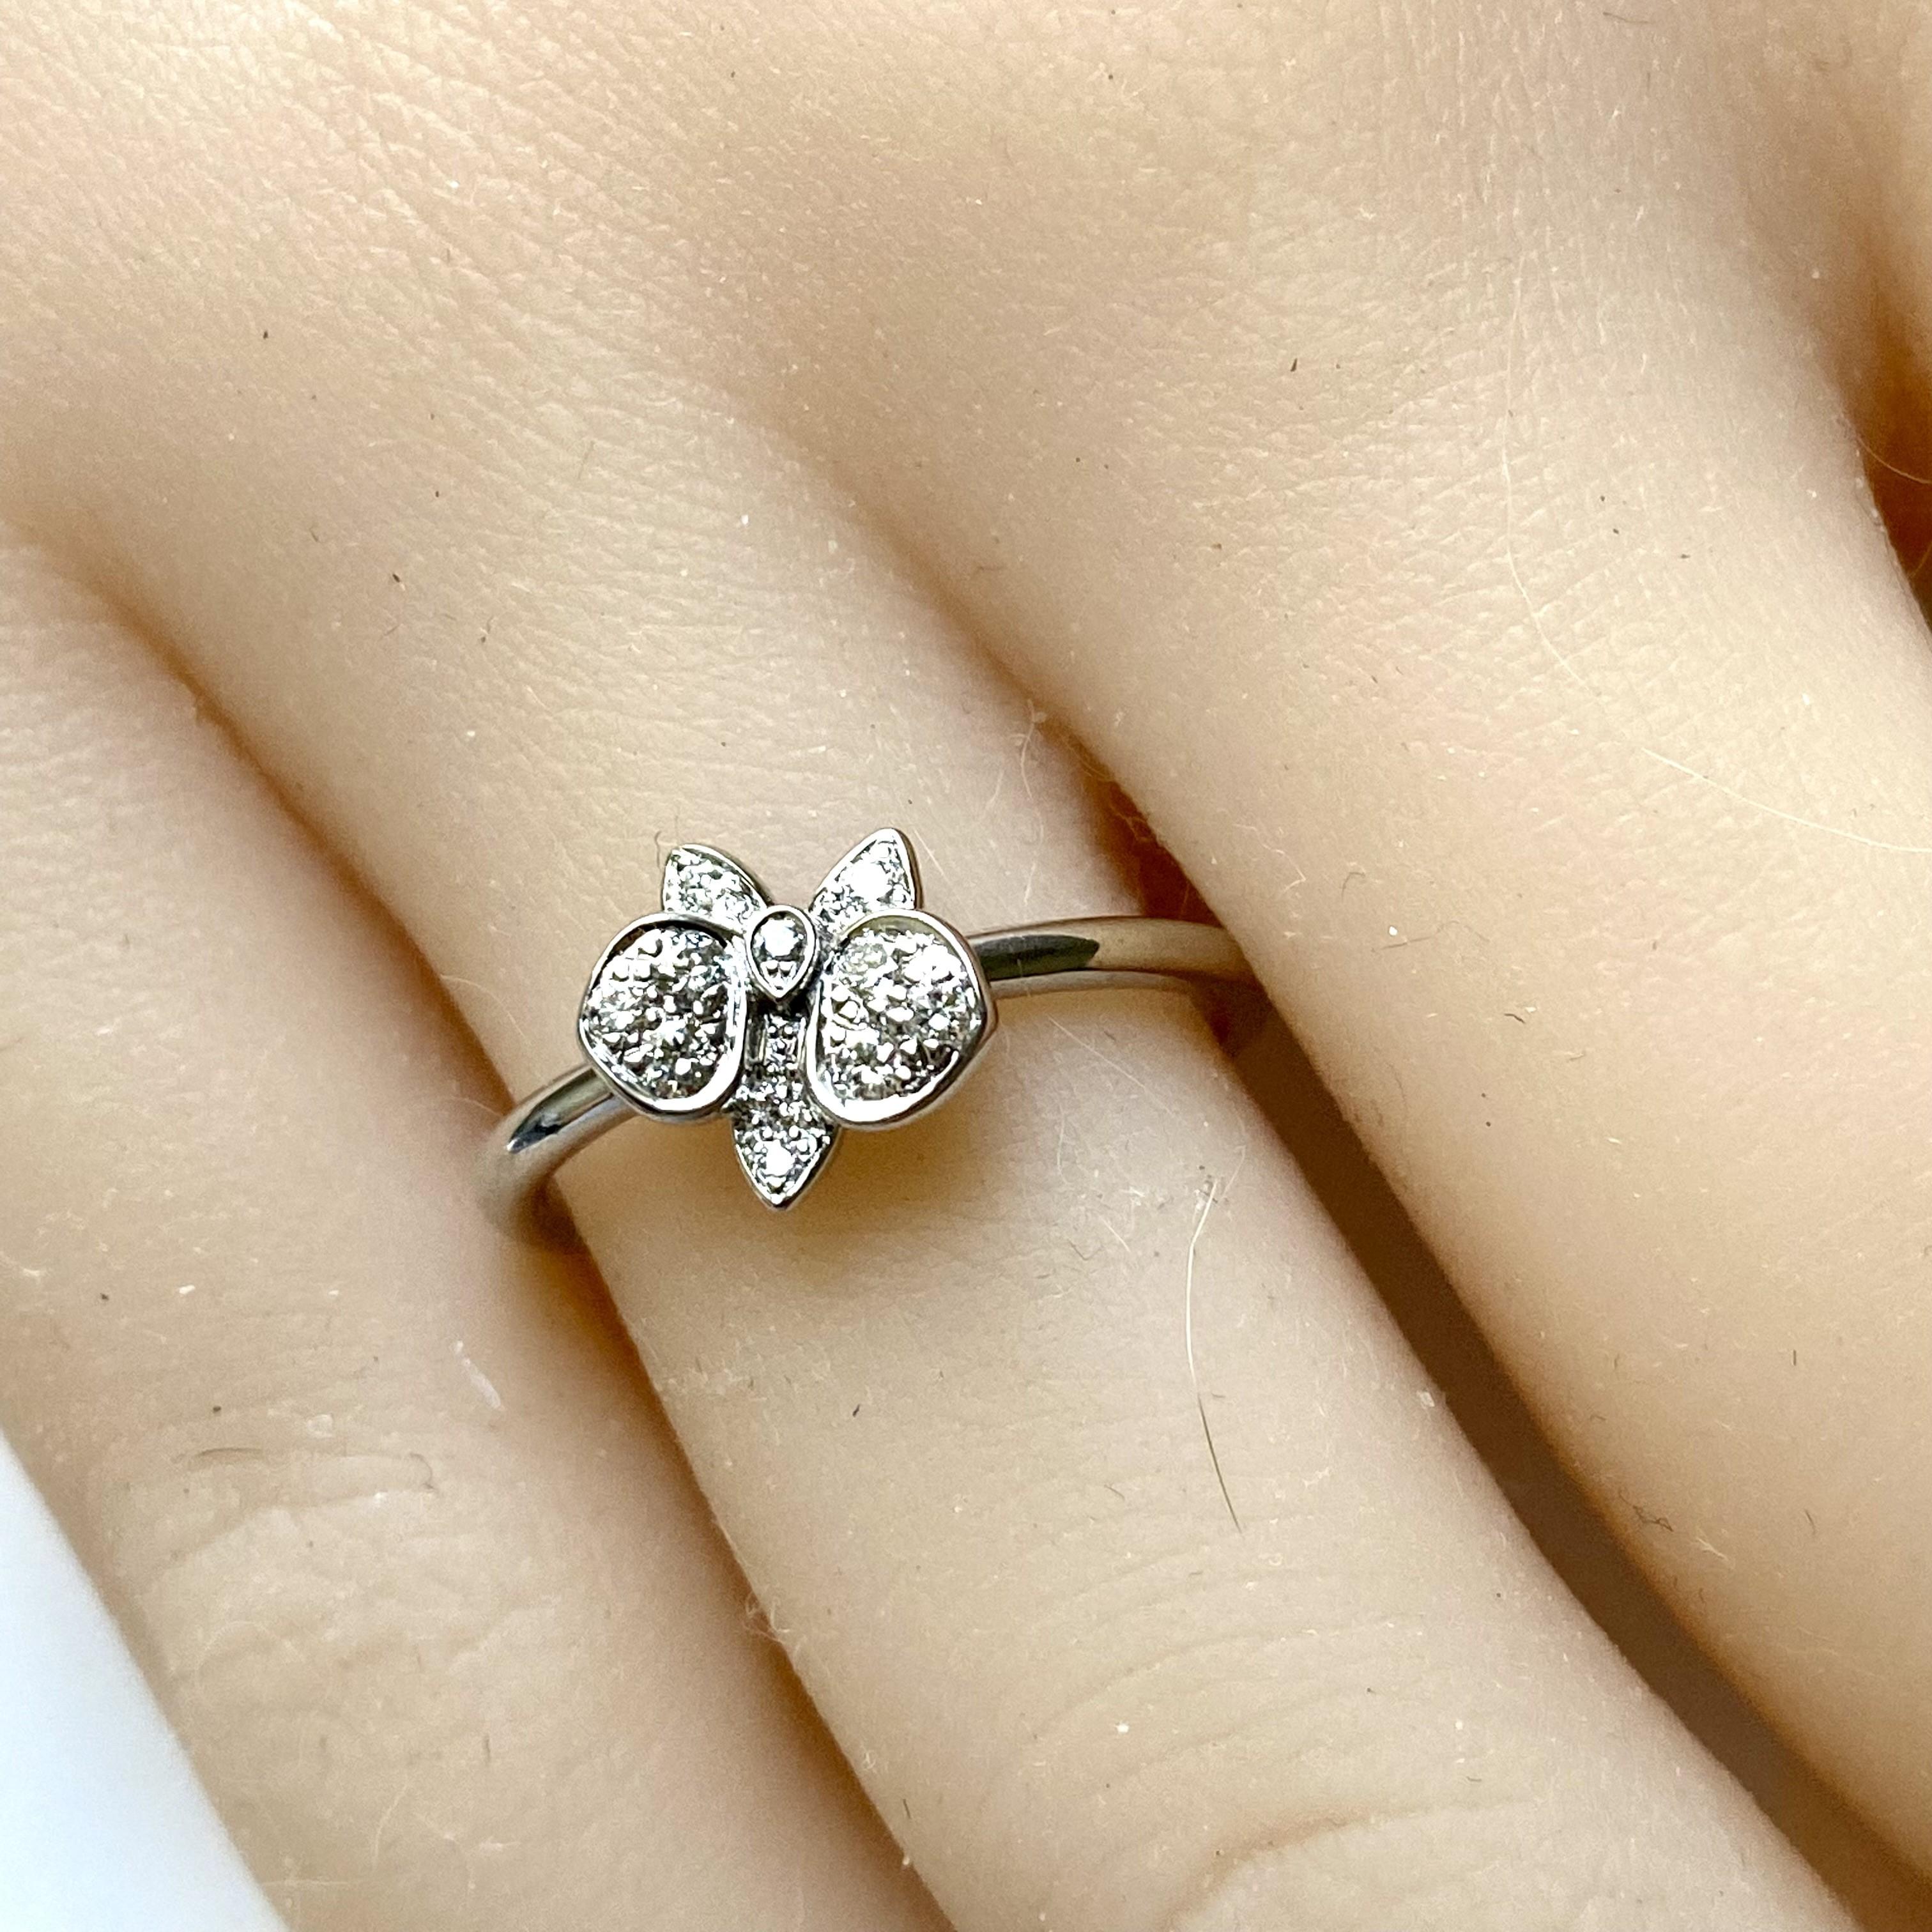 A Cartier favorite, the orchid is the key element of this delicate collection: discover Caresse d’Orchidées
Cartier Paris diamond orchid flower ring
18k white gold diamond ring 
Ring size: 6.5
Ring weight: 2.8 gram
Condition: A+: